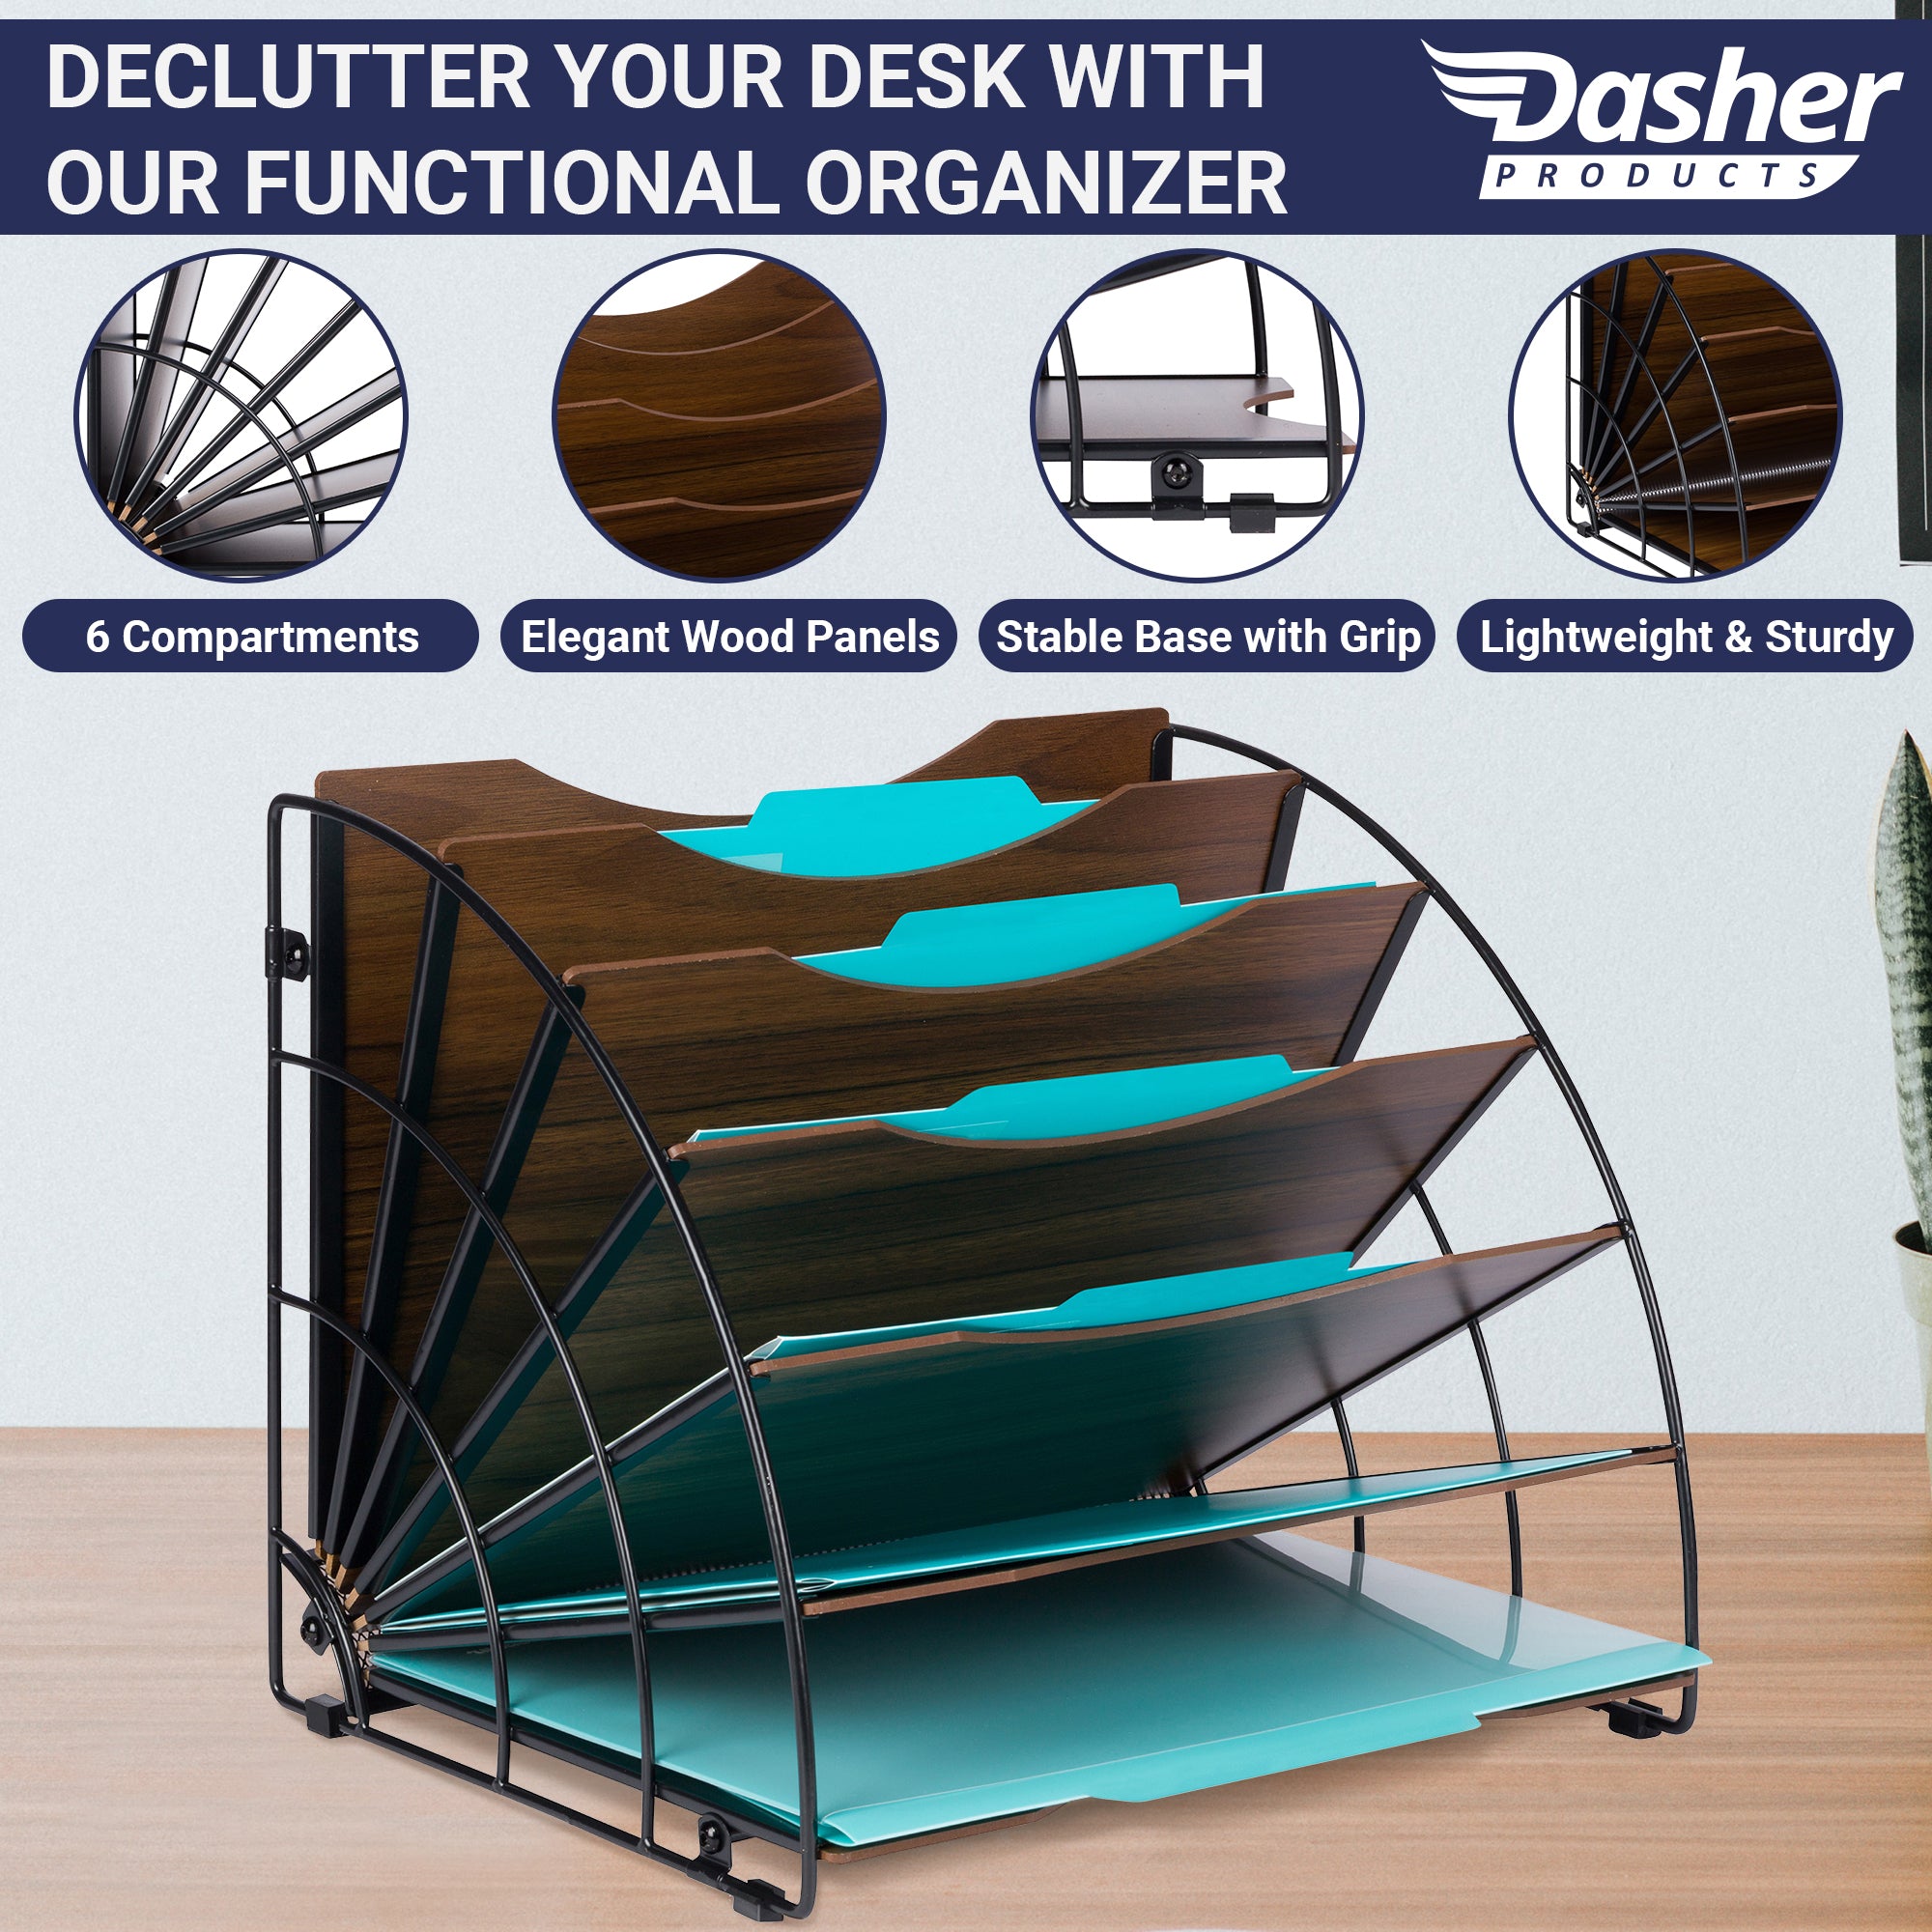 Fan Shaped Office Desk Organisers, 6 Compartments with Wood Patterned